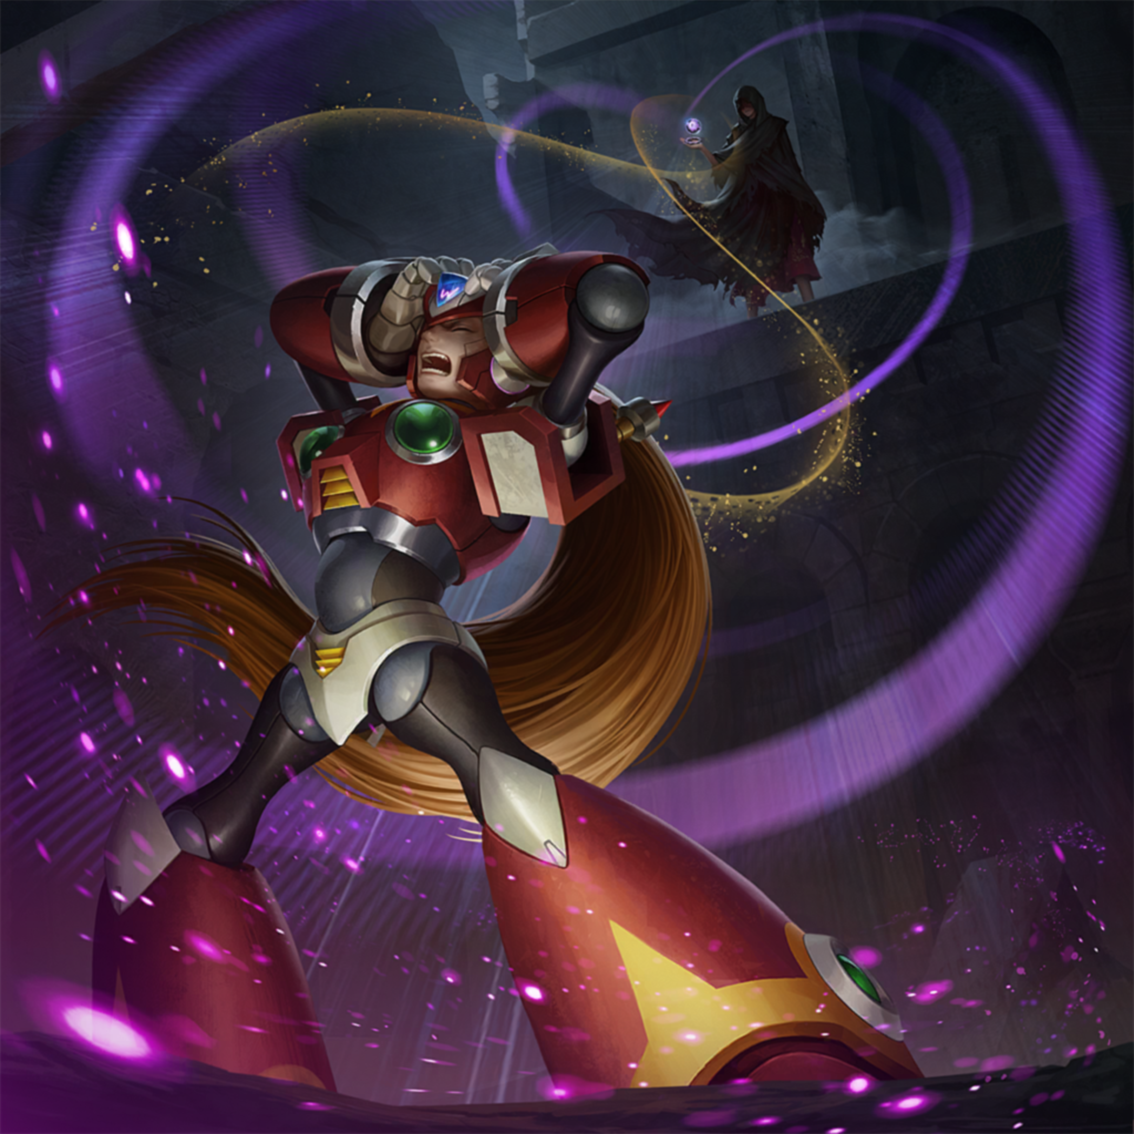 New Mega Man X Cards Introduced with Teppen's Latest Card Pack, "...